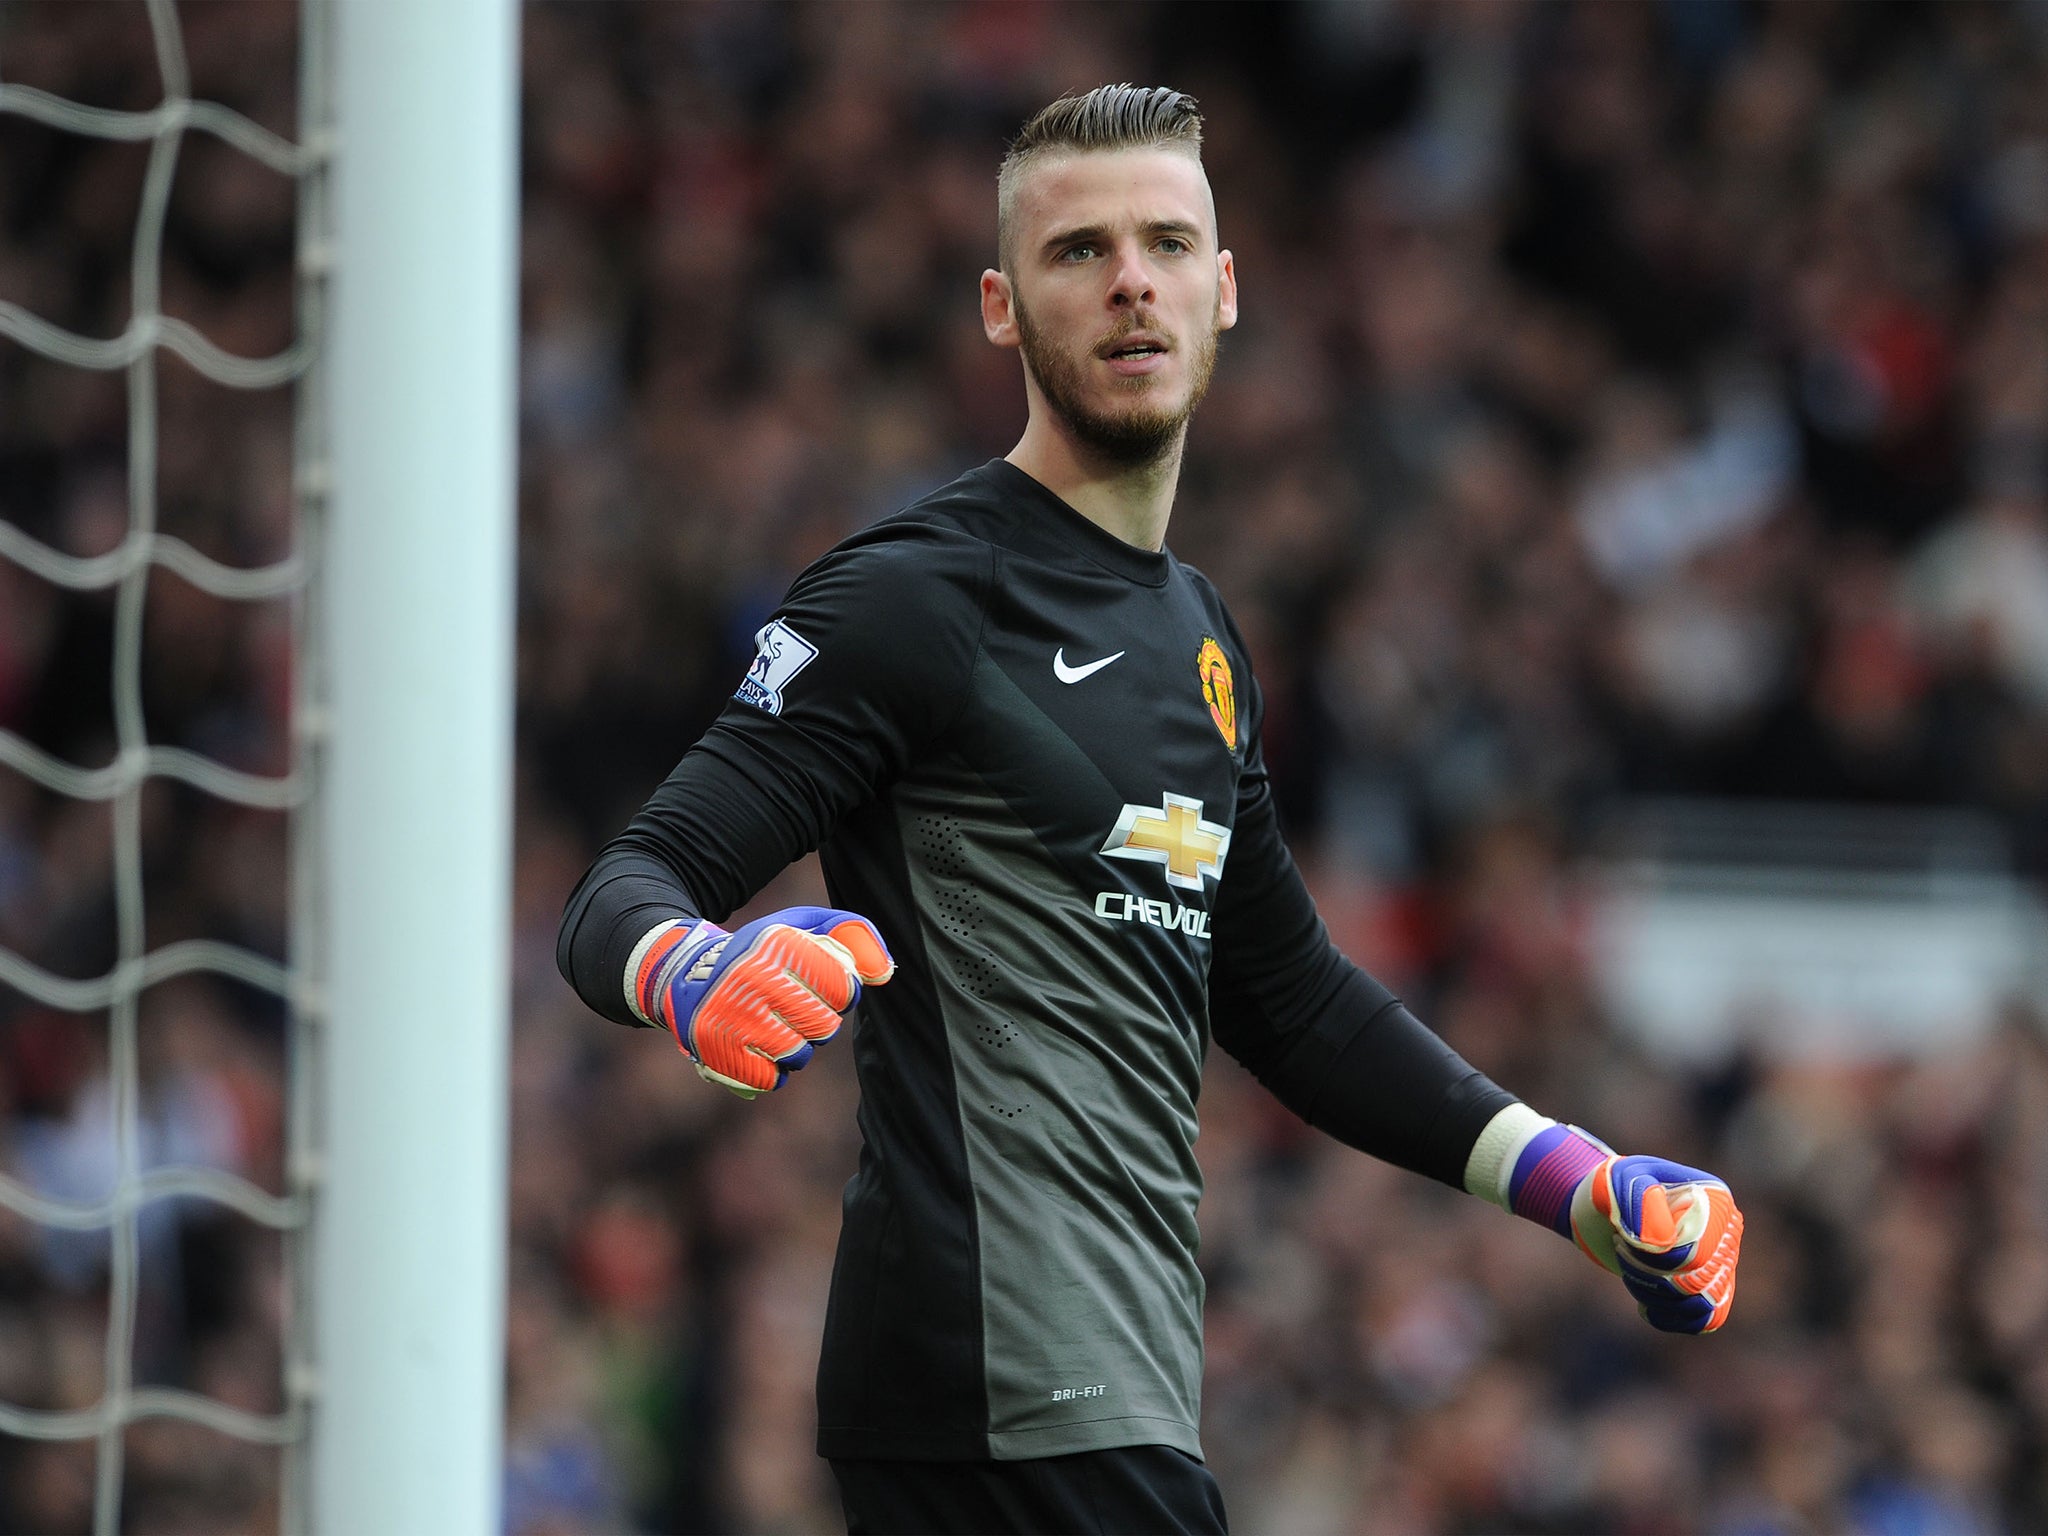 David De Gea has been heavily linked with Real Madrid